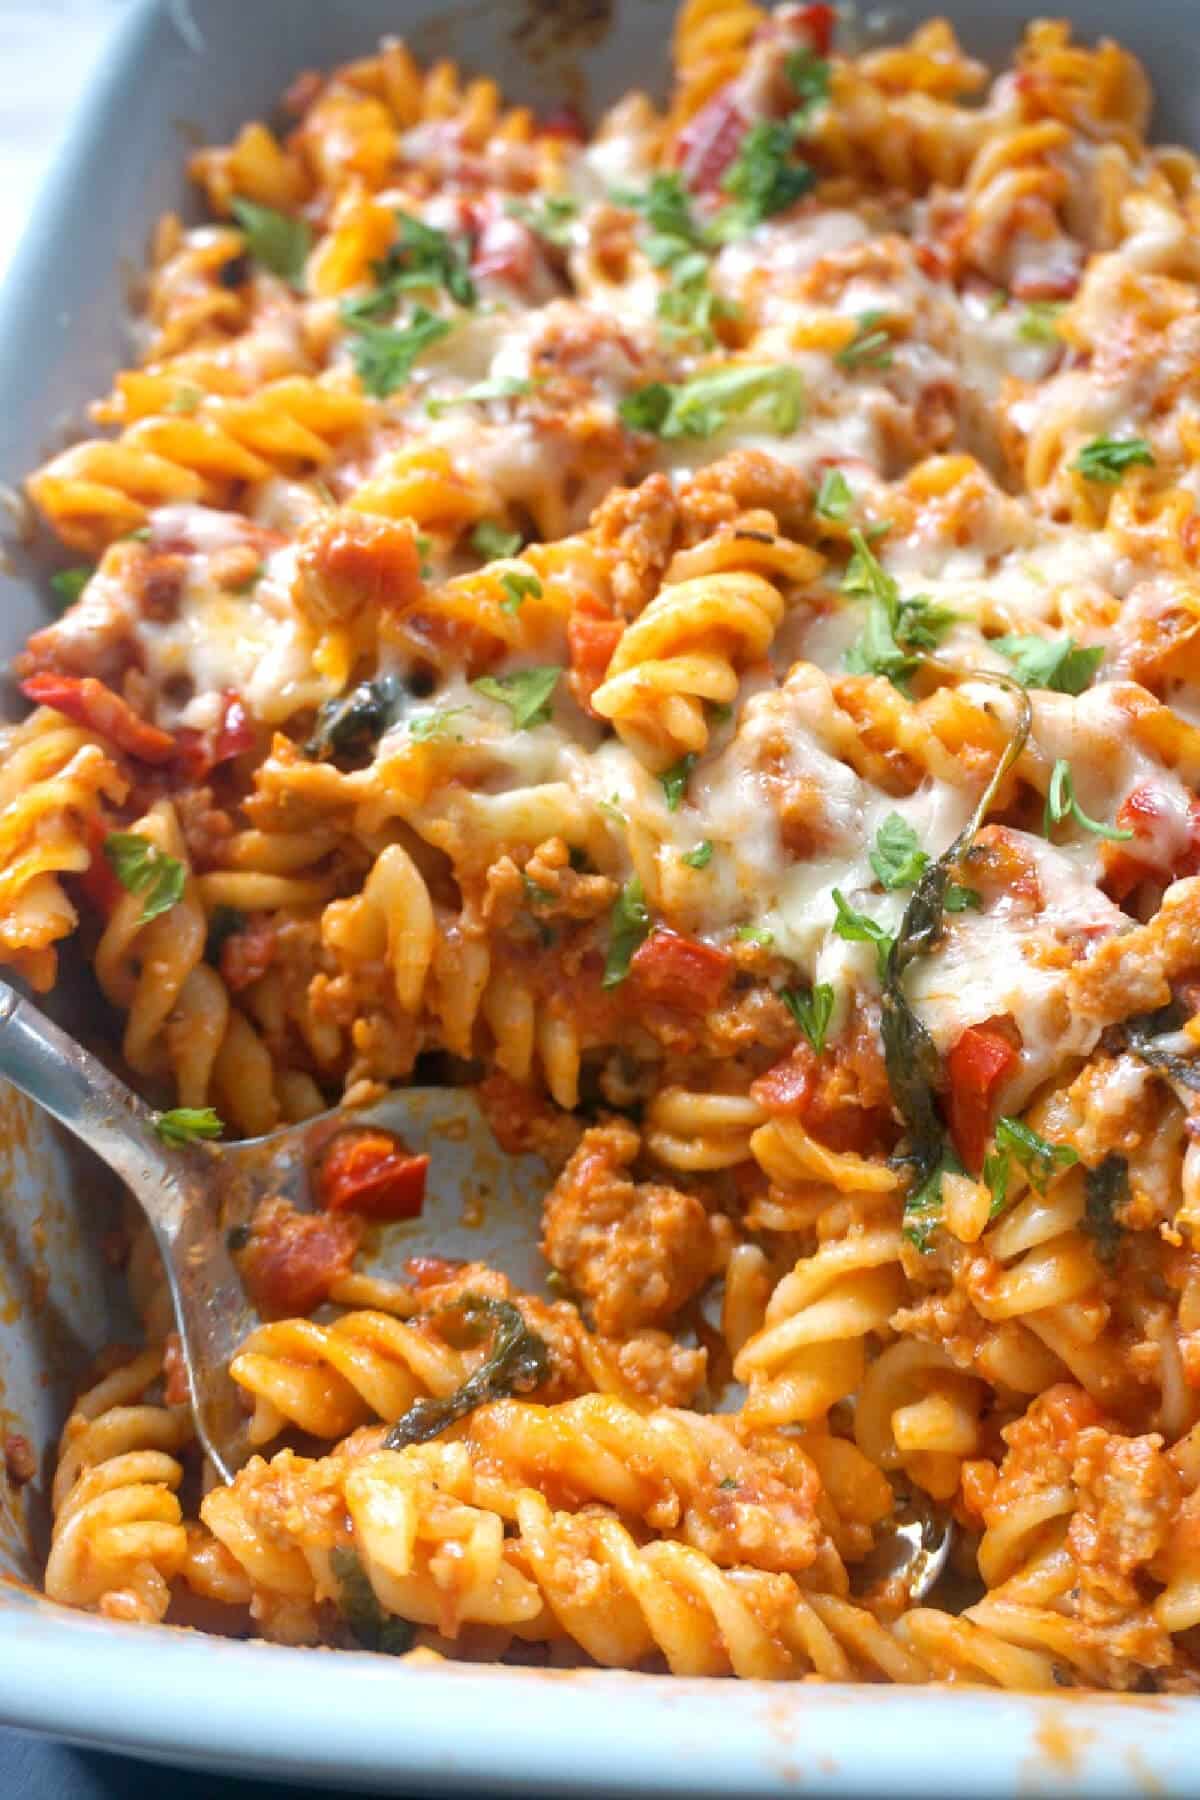 A dish with sausage and pasta casserole.